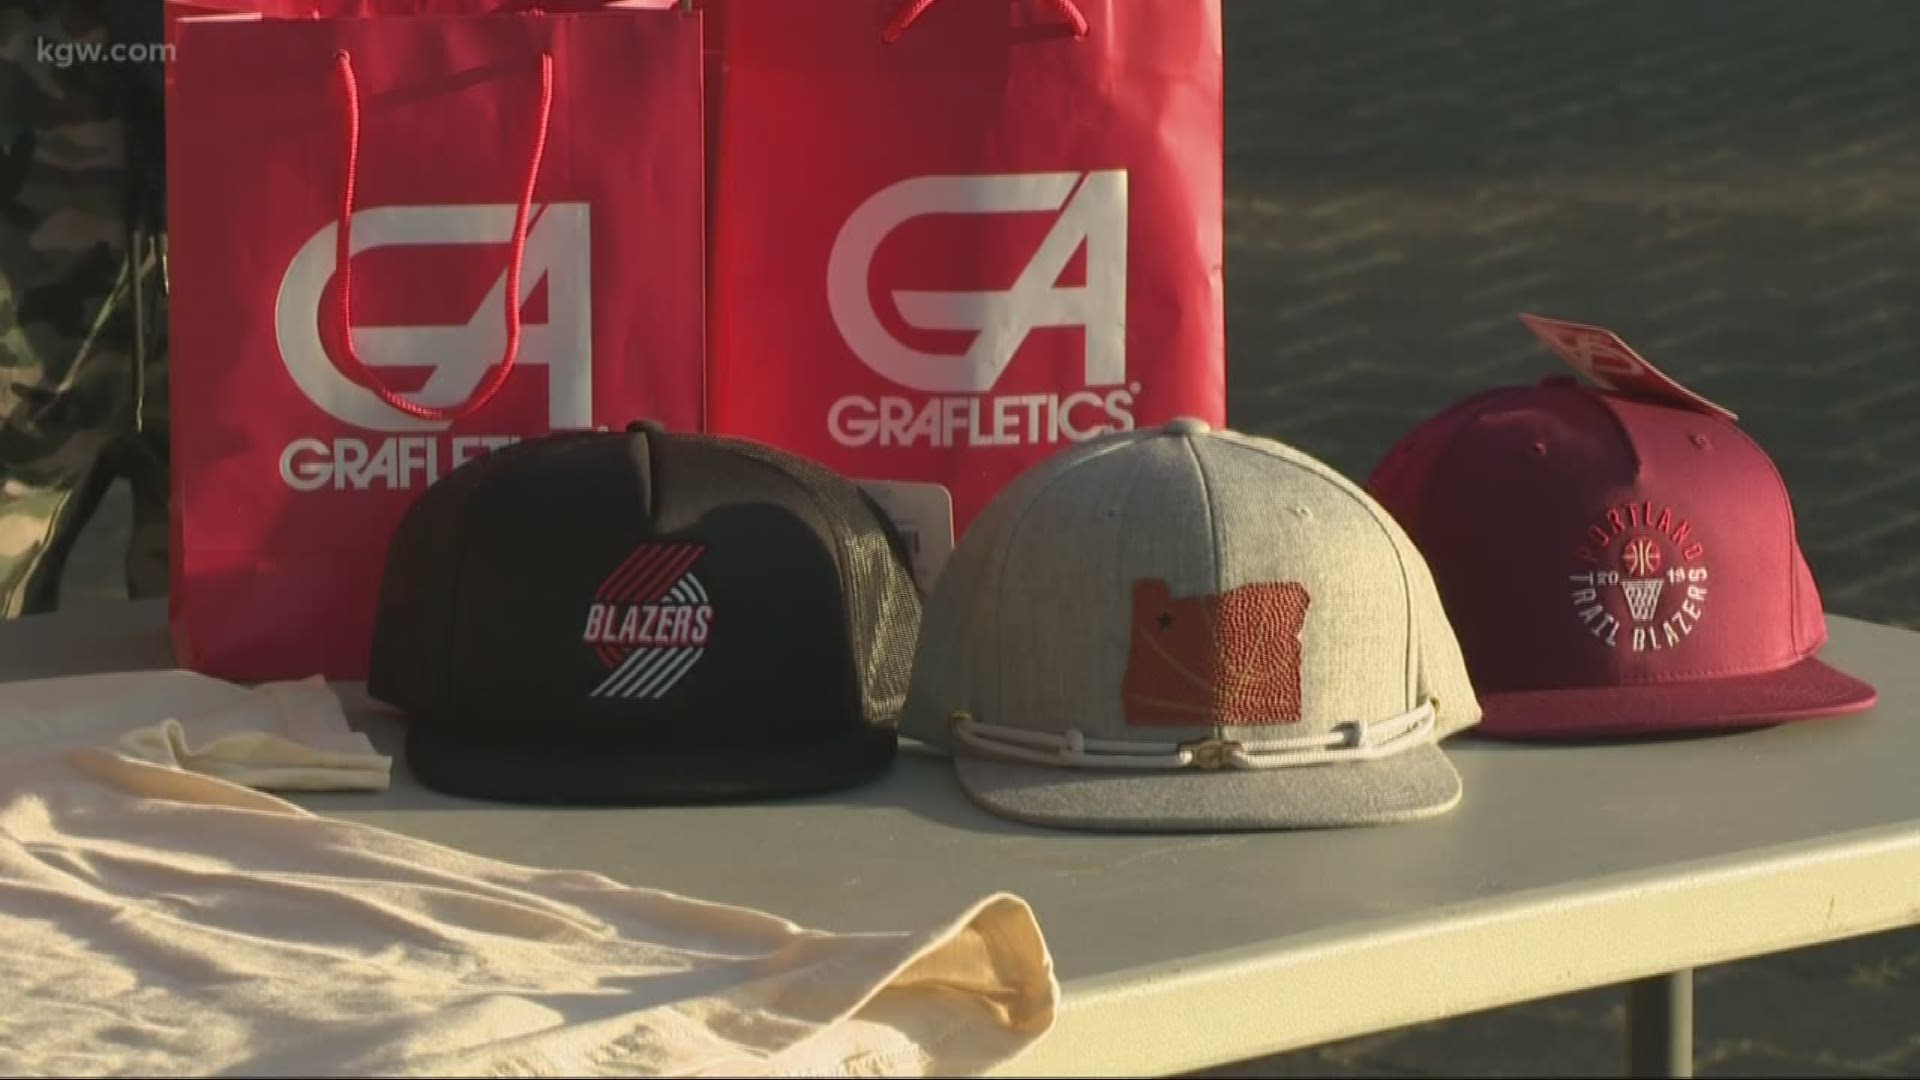 The founder of Grafletics is behind some great post-season Blazers gear that you can get at the Moda Center.
grafletics.com
#TonightwithCassidy